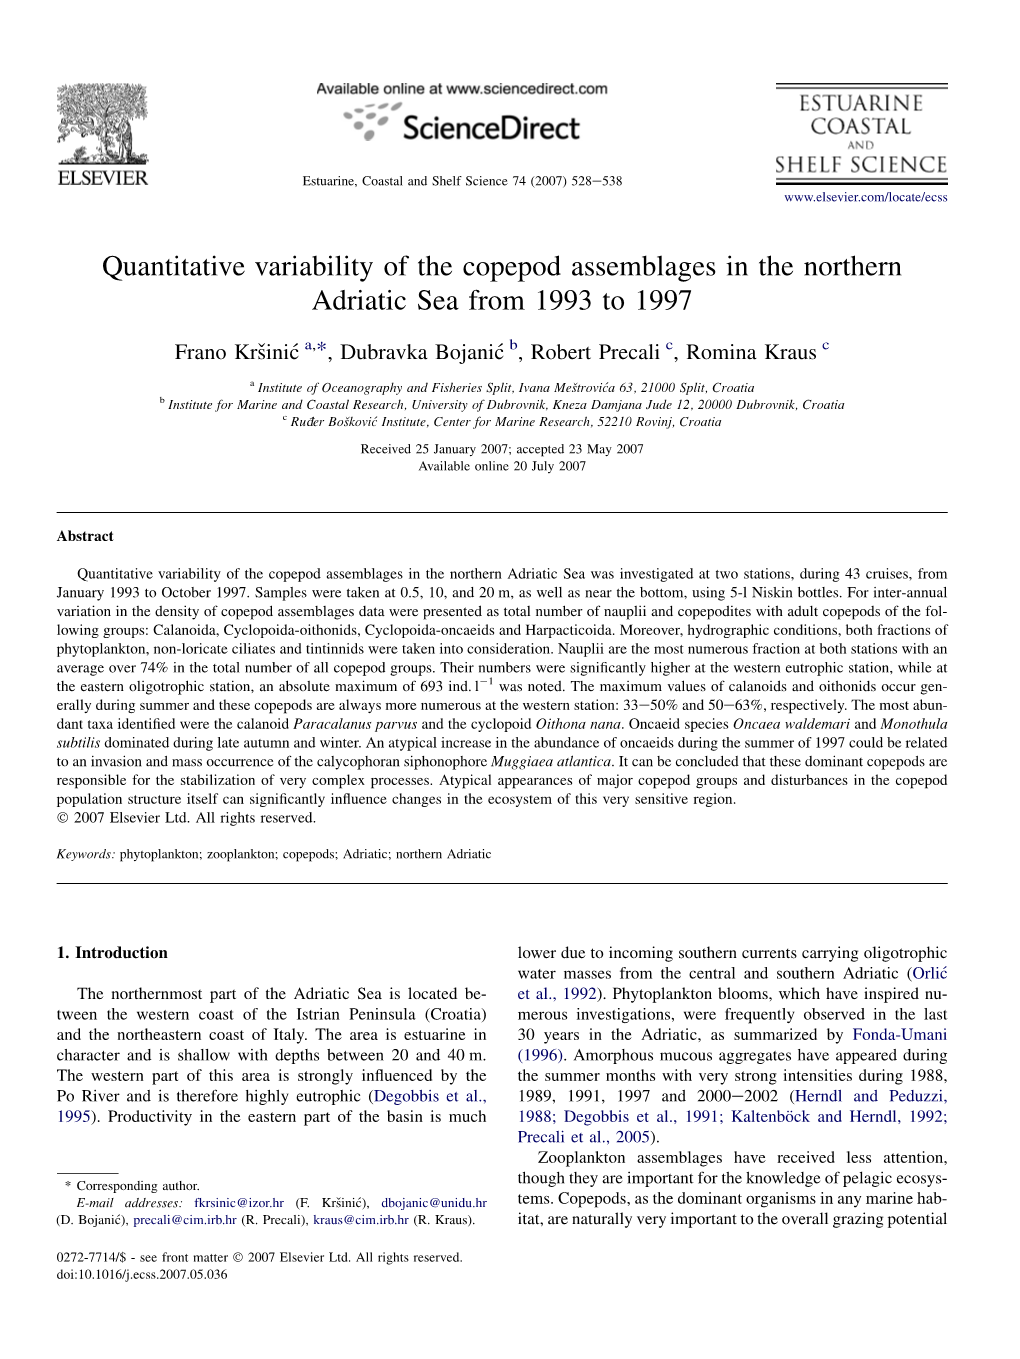 Quantitative Variability of the Copepod Assemblages in the Northern Adriatic Sea from 1993 to 1997